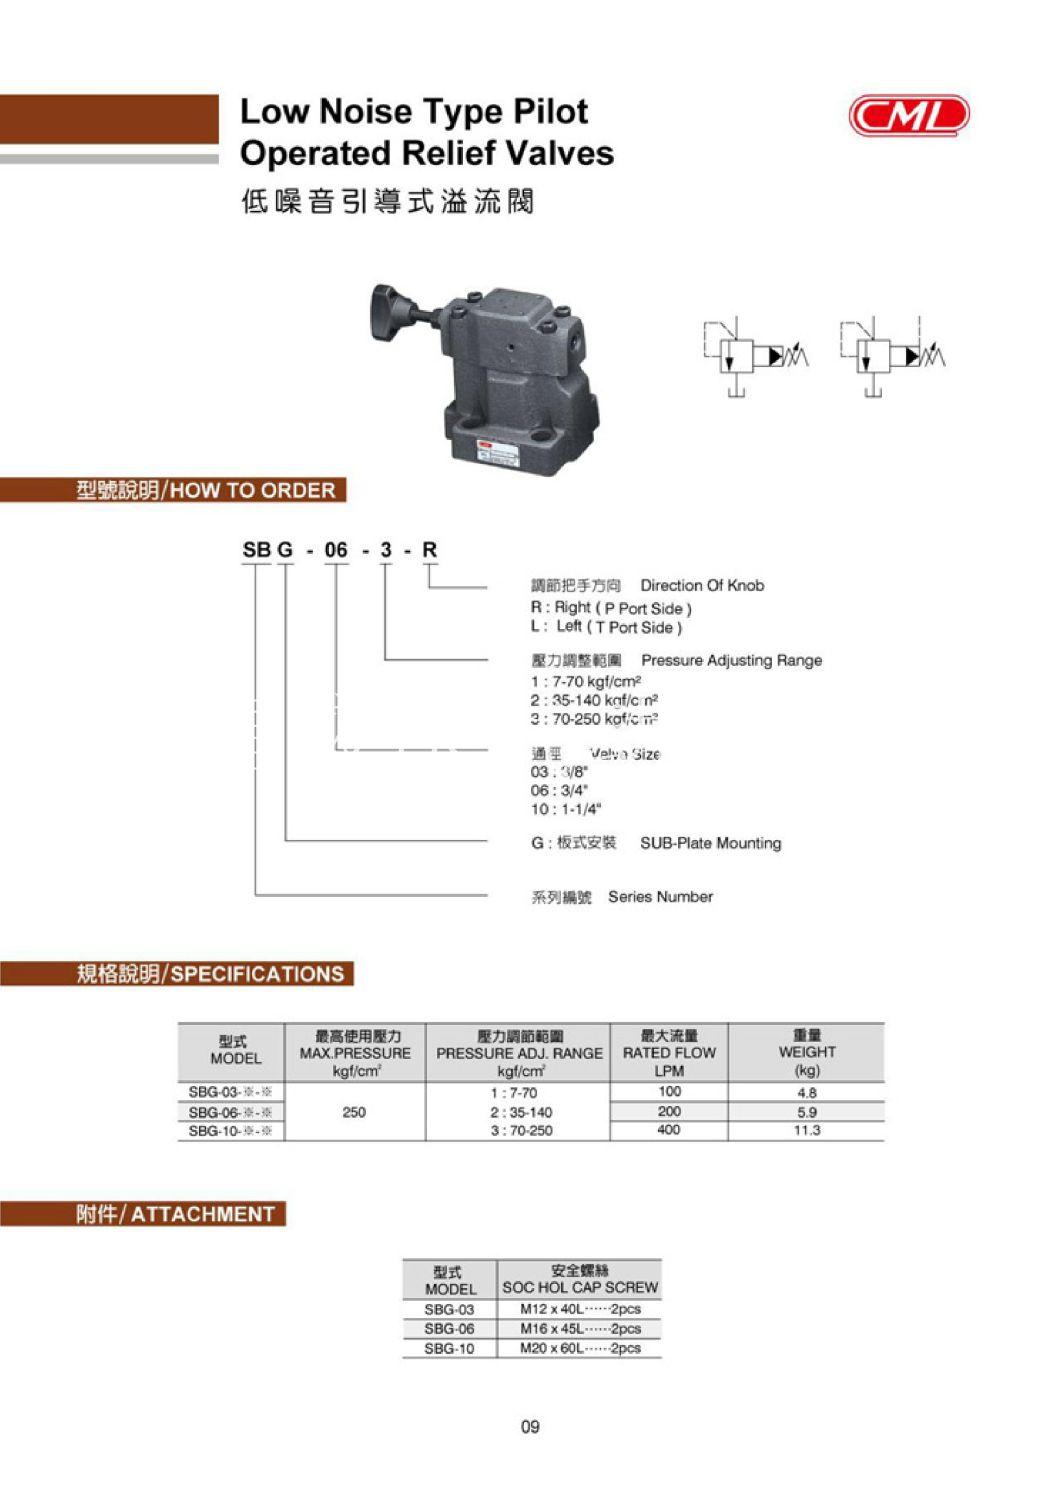 Pressure Control - Low Noise Type Pilot Operated Relief Valves